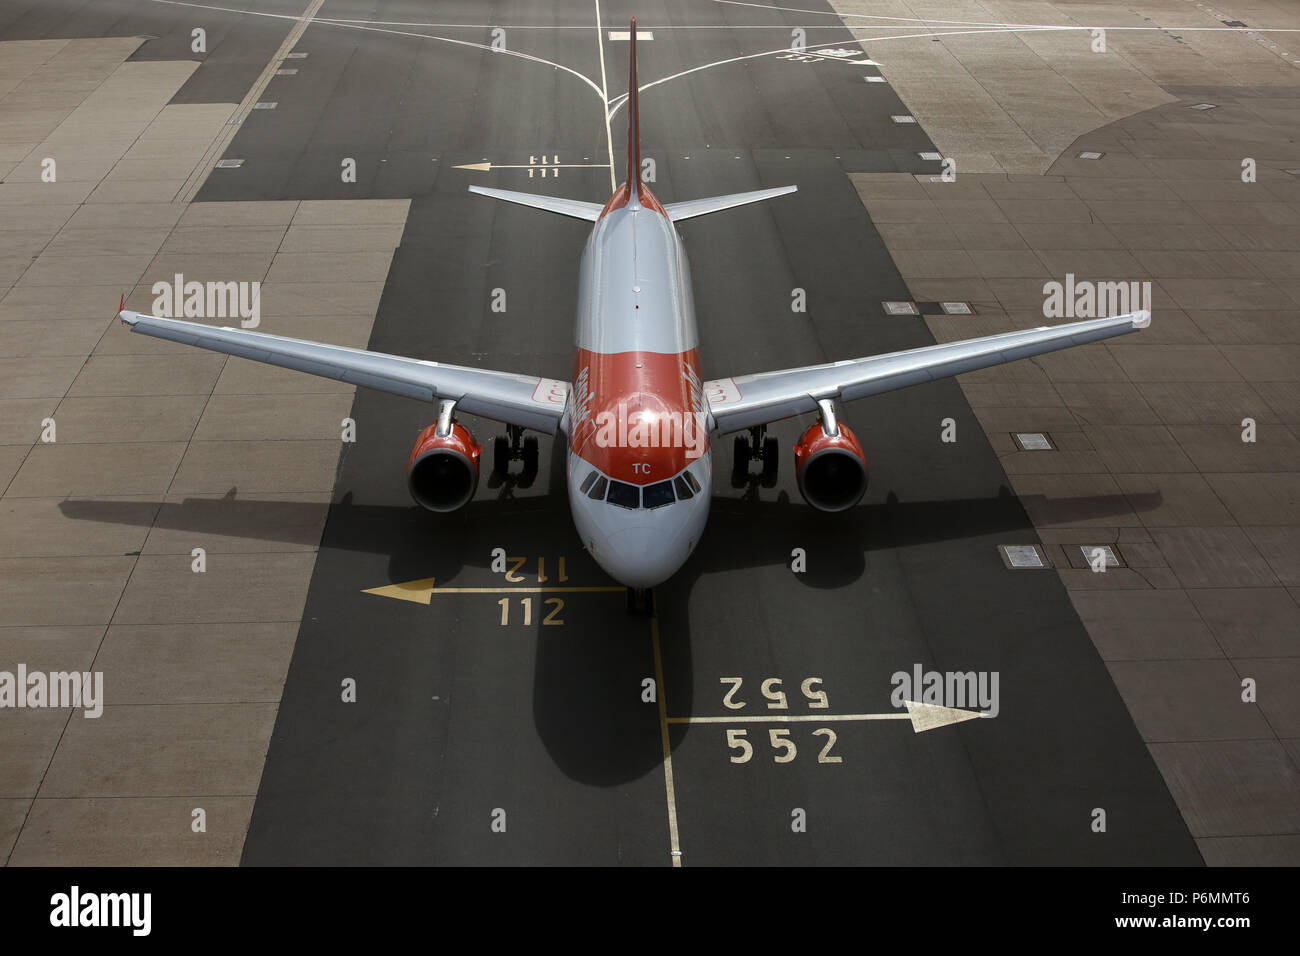 London, United Kingdom, Airbus A 320 of the easyJet airline on the London Gatwick airport taxiway Stock Photo